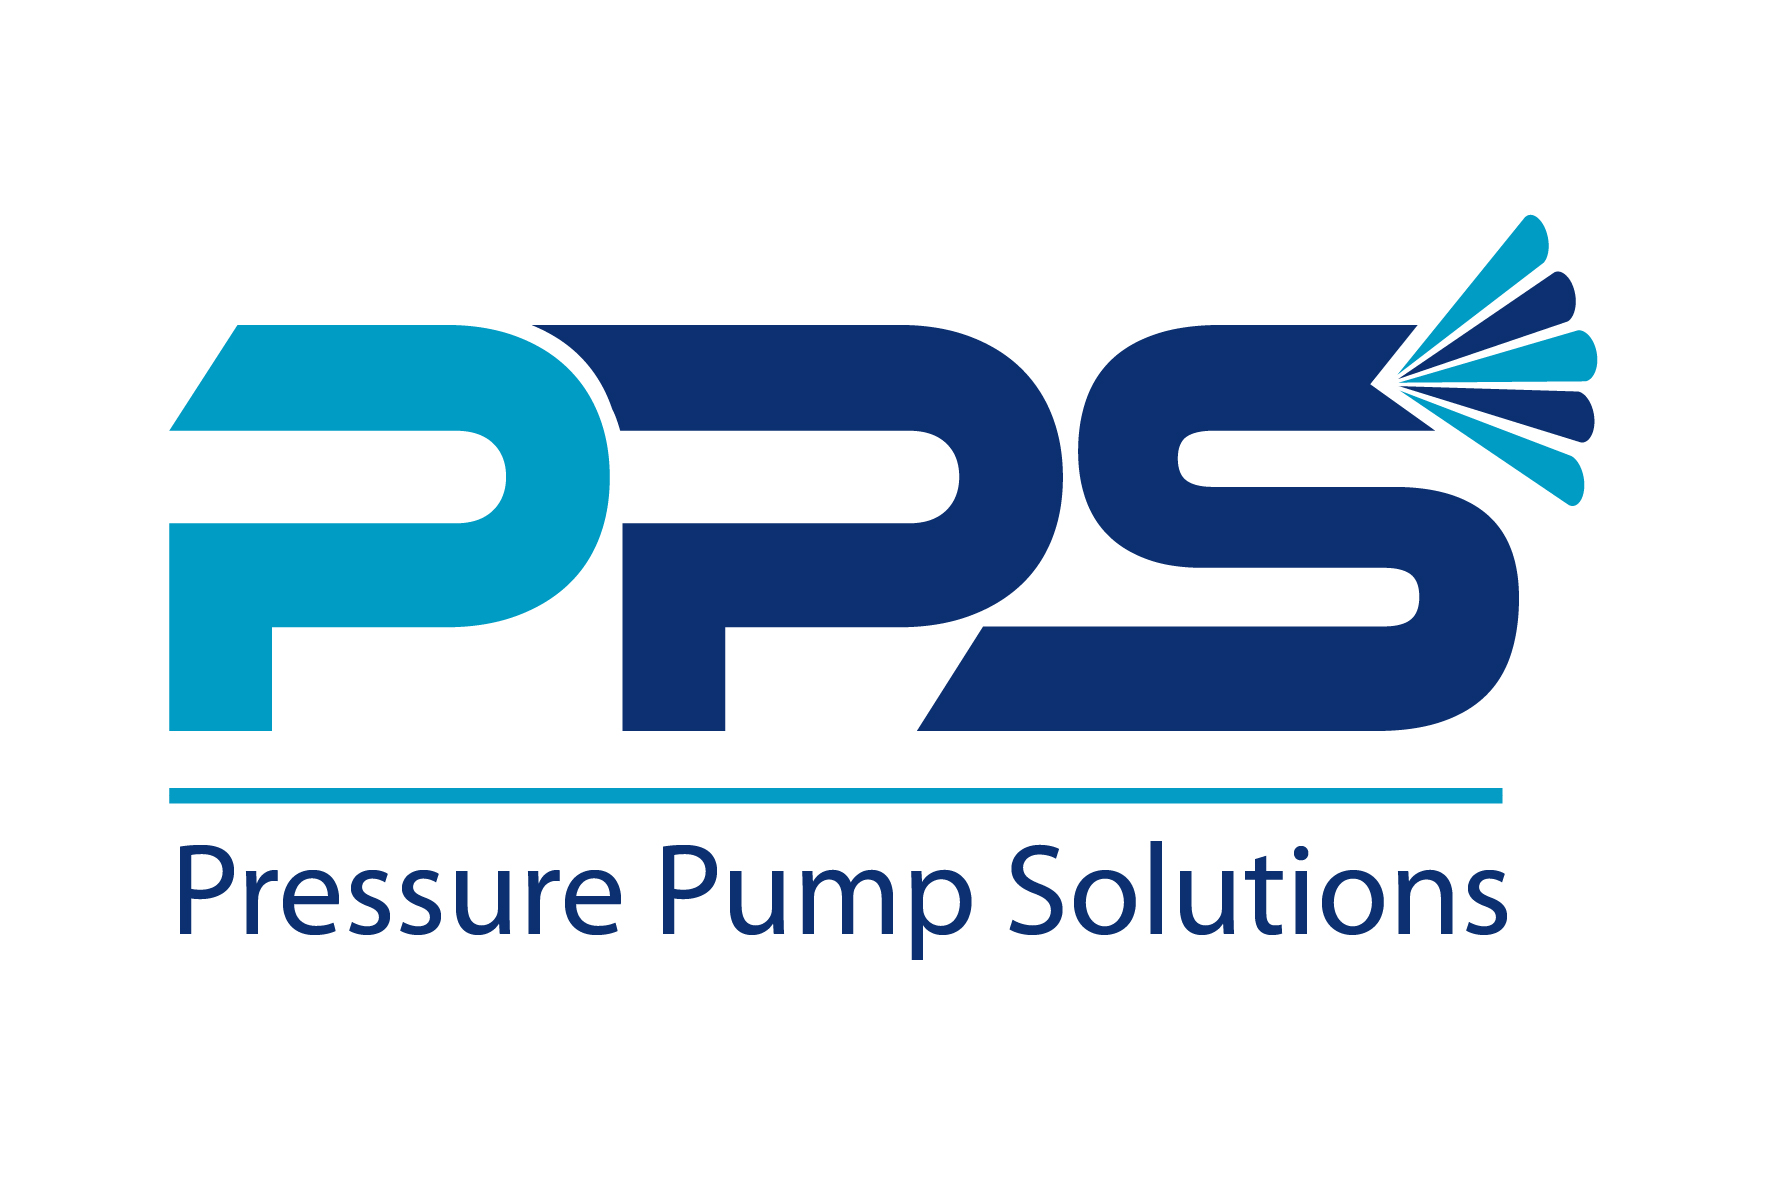 Pressure Pump Solutions announces strategic partnership with Hyundai Power Products